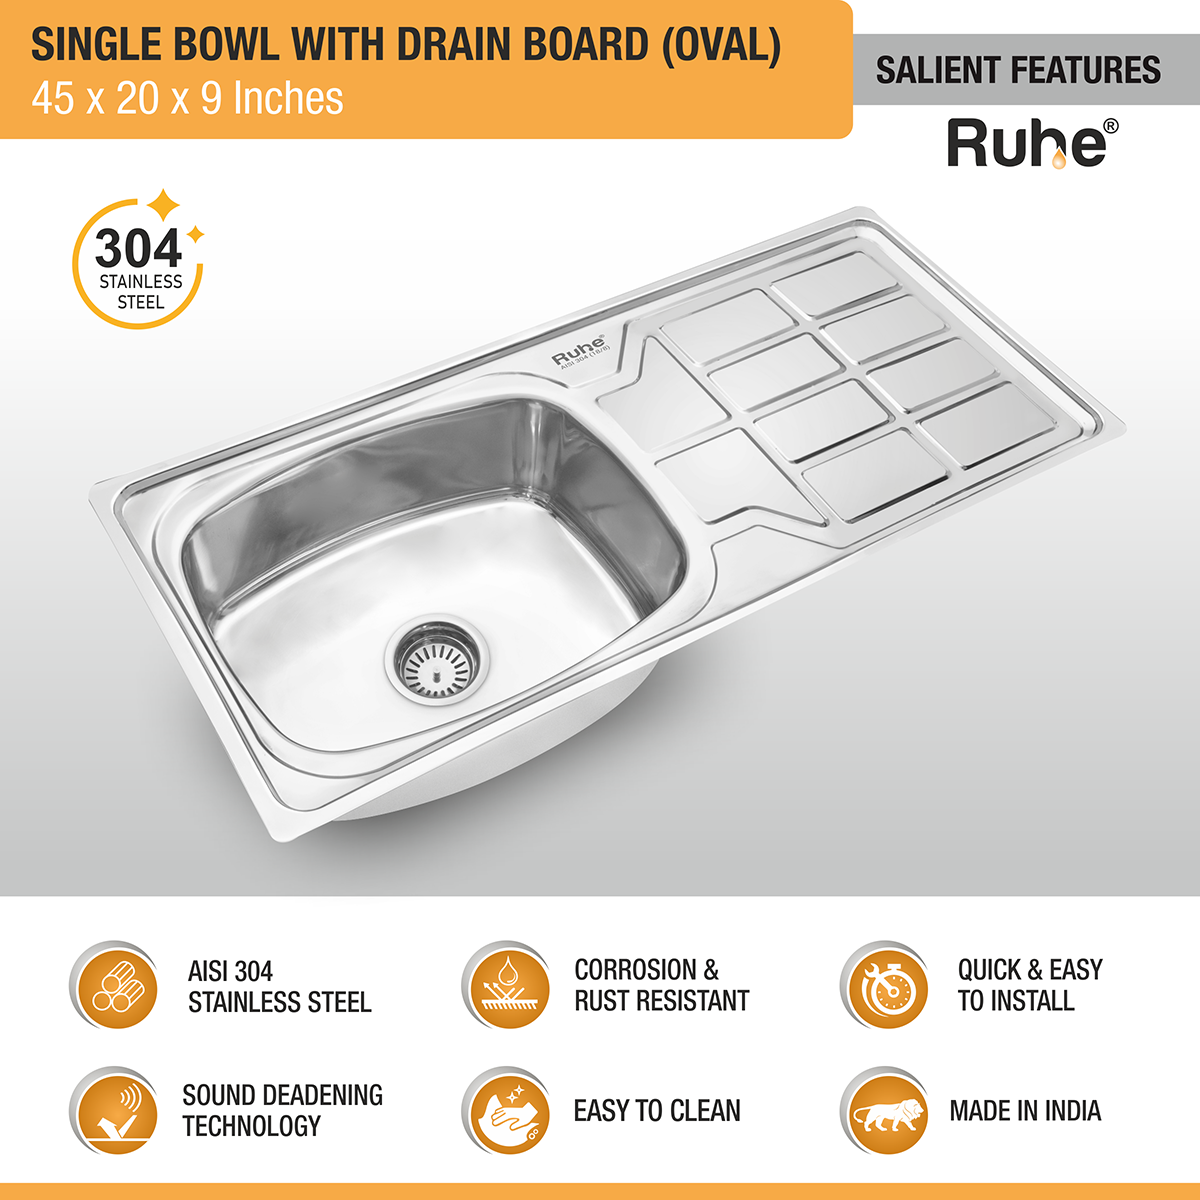 Oval Single Bowl (45 x 20 x 9 inches) 304-Grade Stainless Steel Kitchen Sink with Drainboard features and benefits